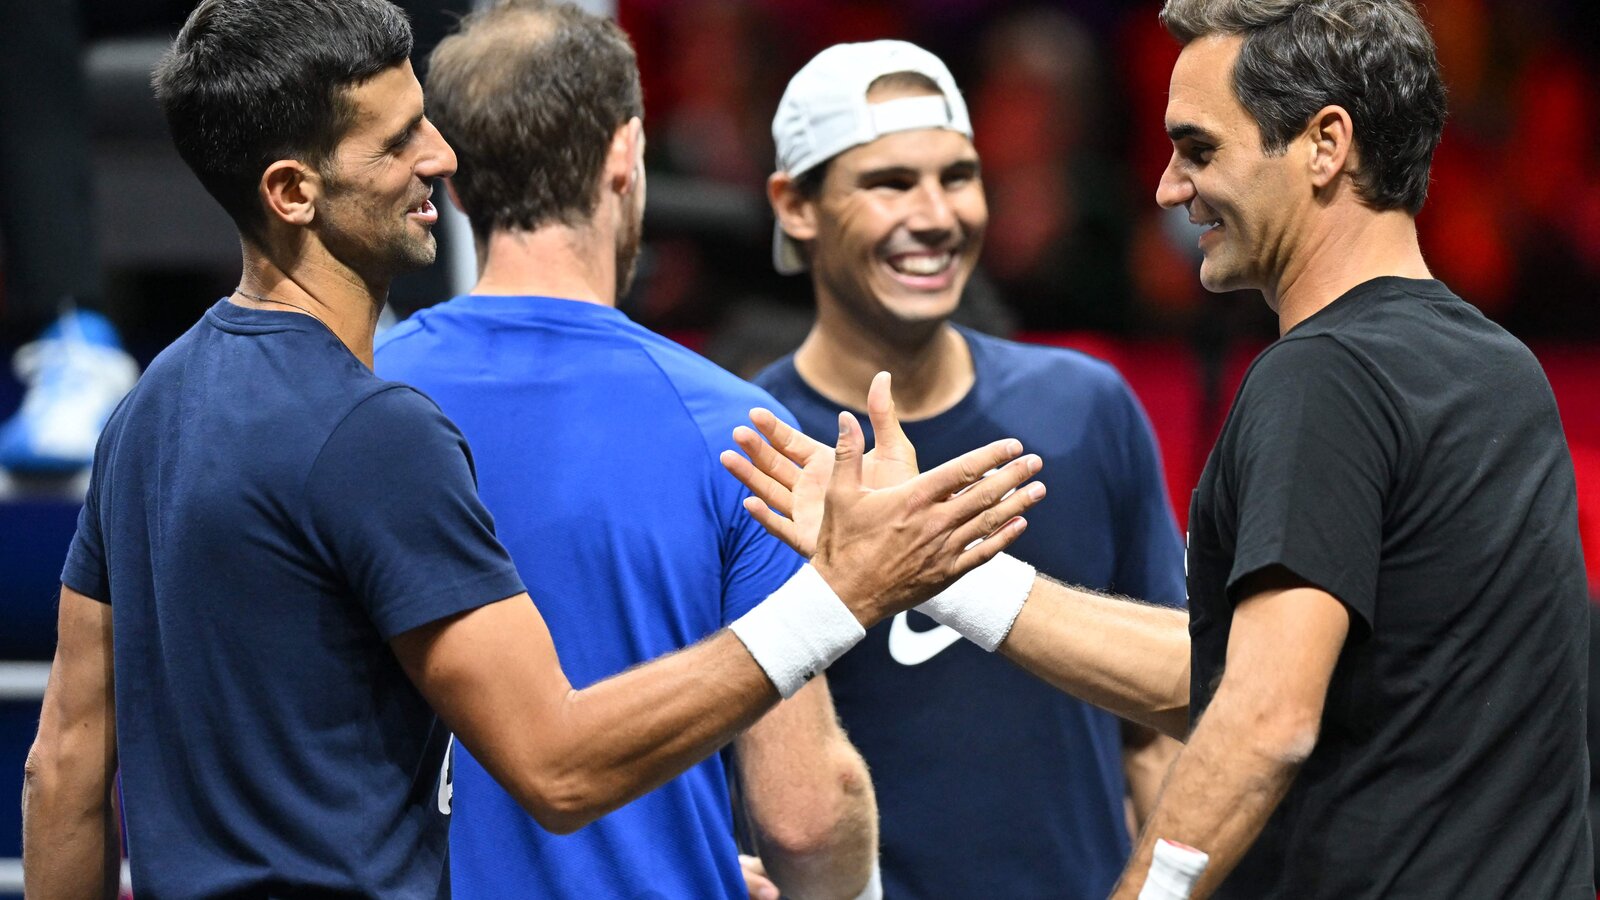 As Roger Federer Retires, Two Great Rivalries Come to an End